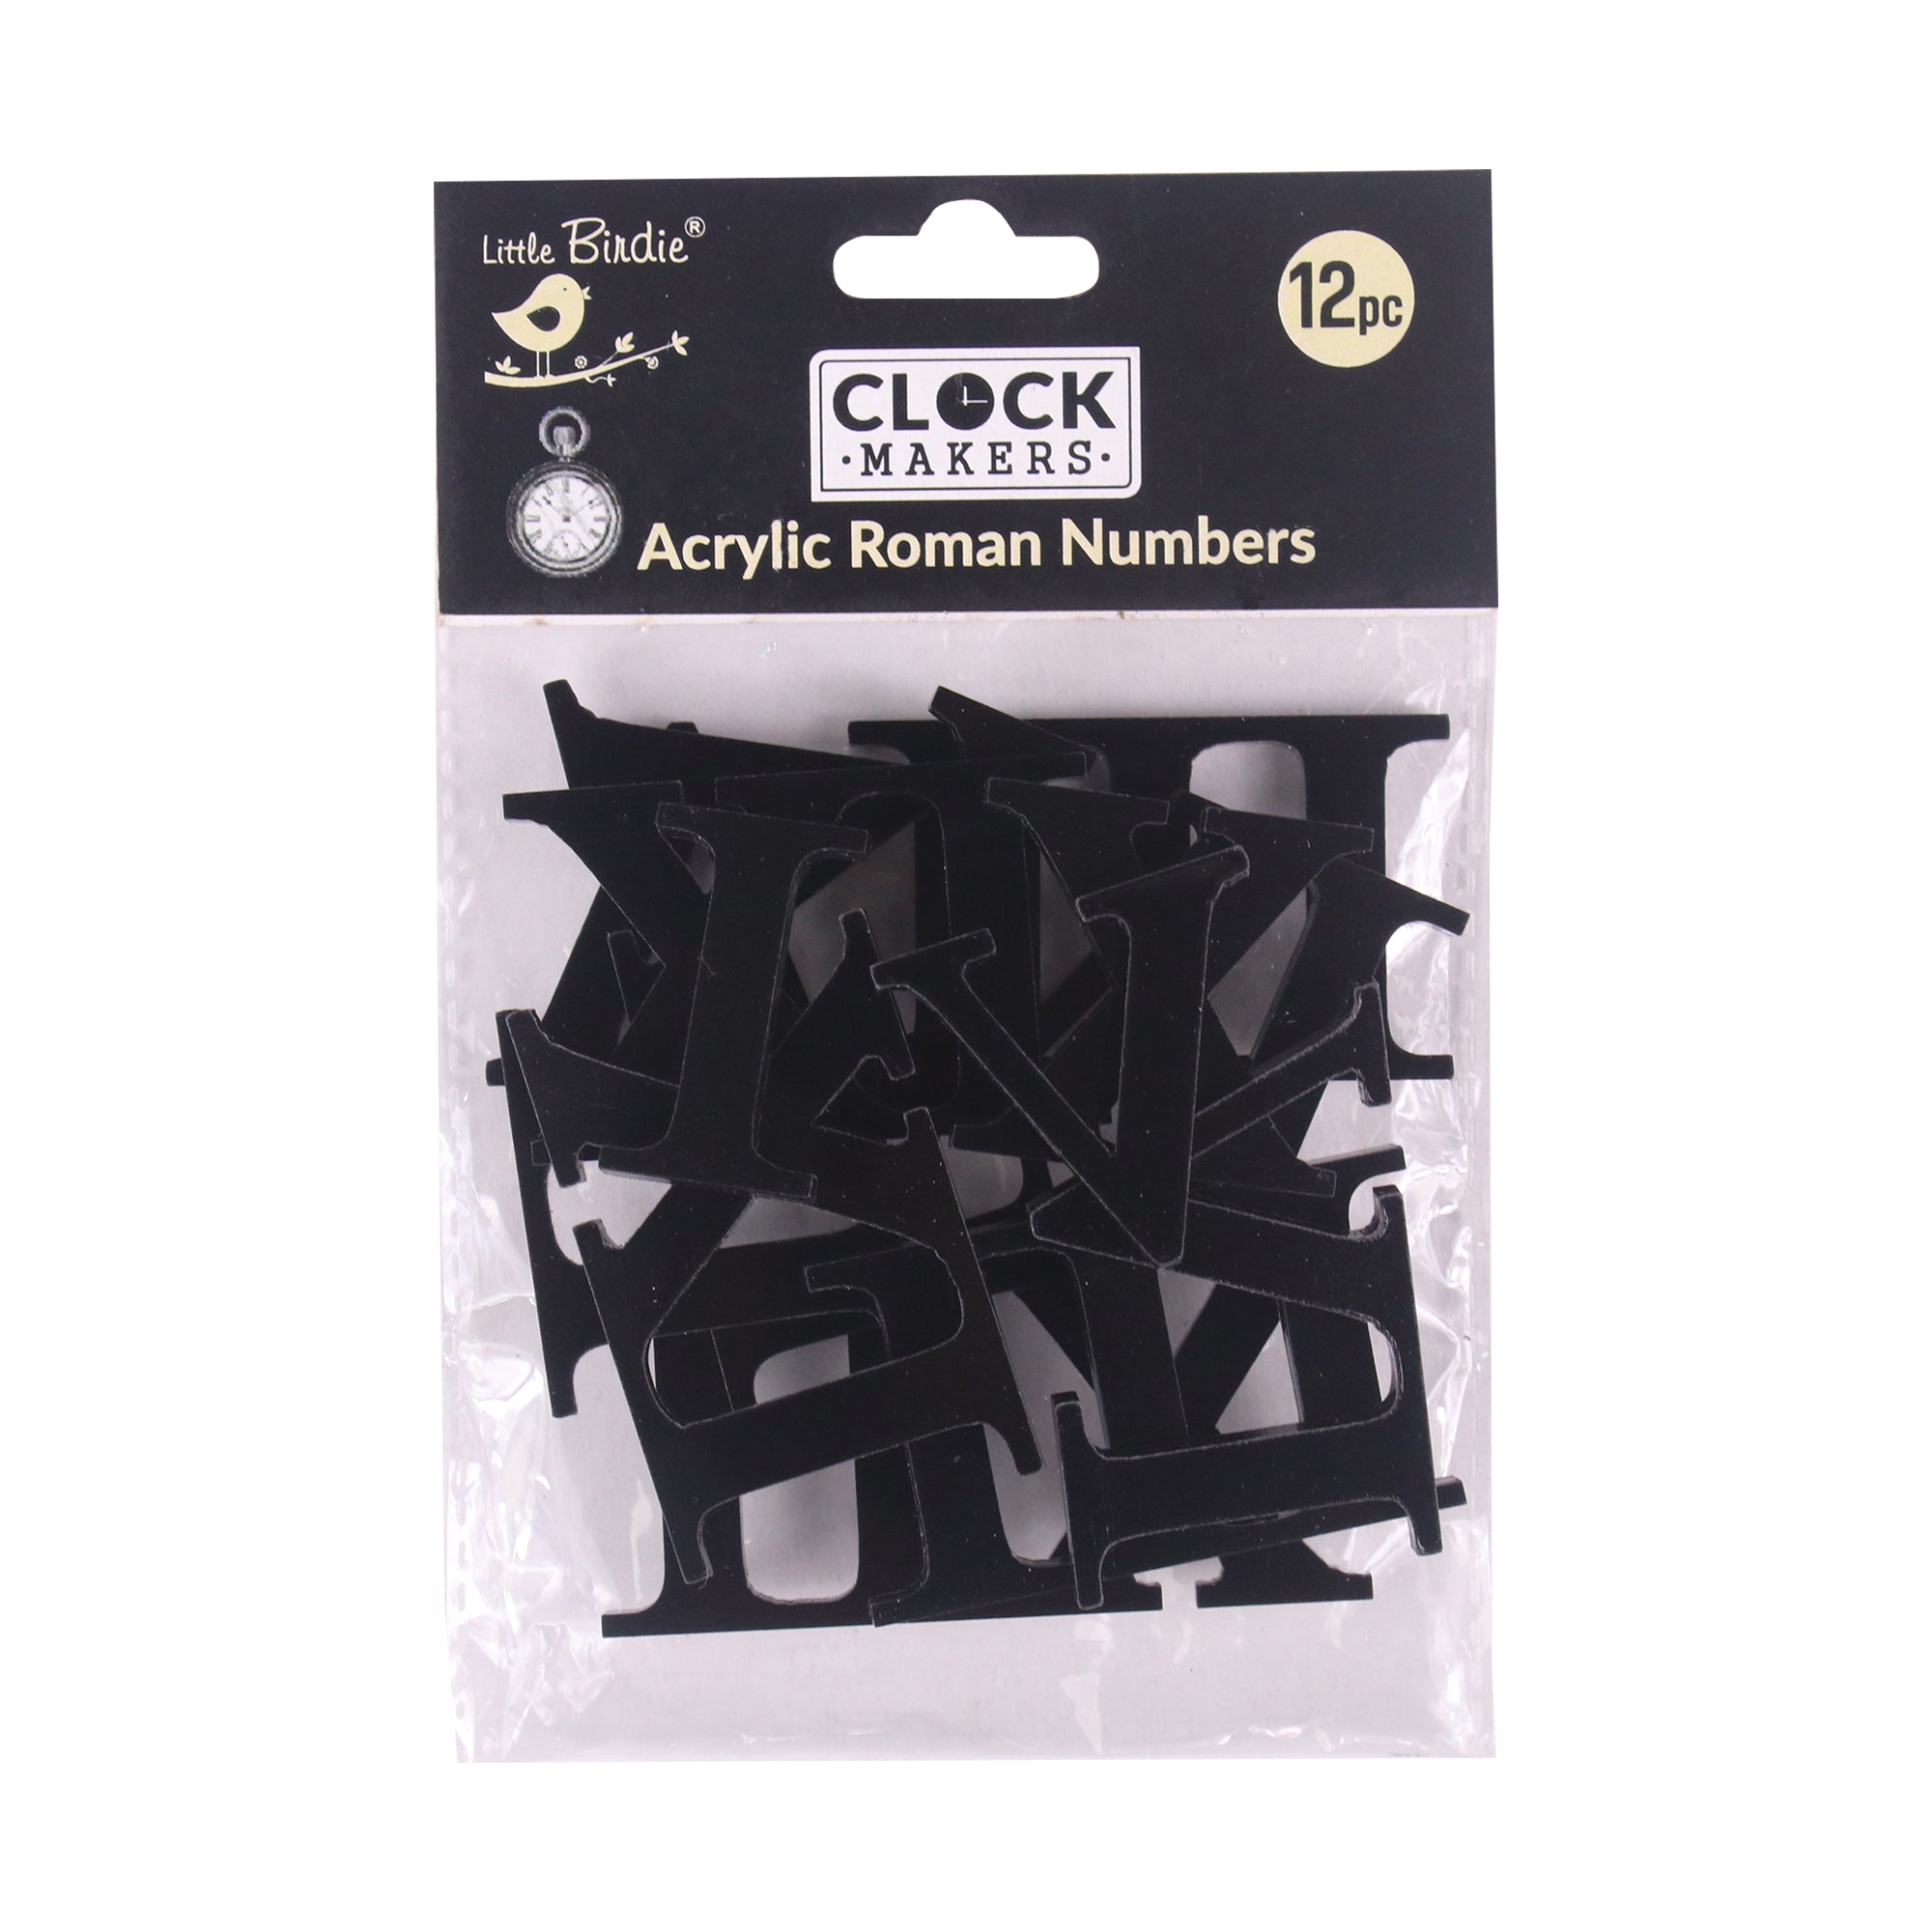 Clock Acrylic Roman Numbers Black 1inch 2.7mm Thick 12pc